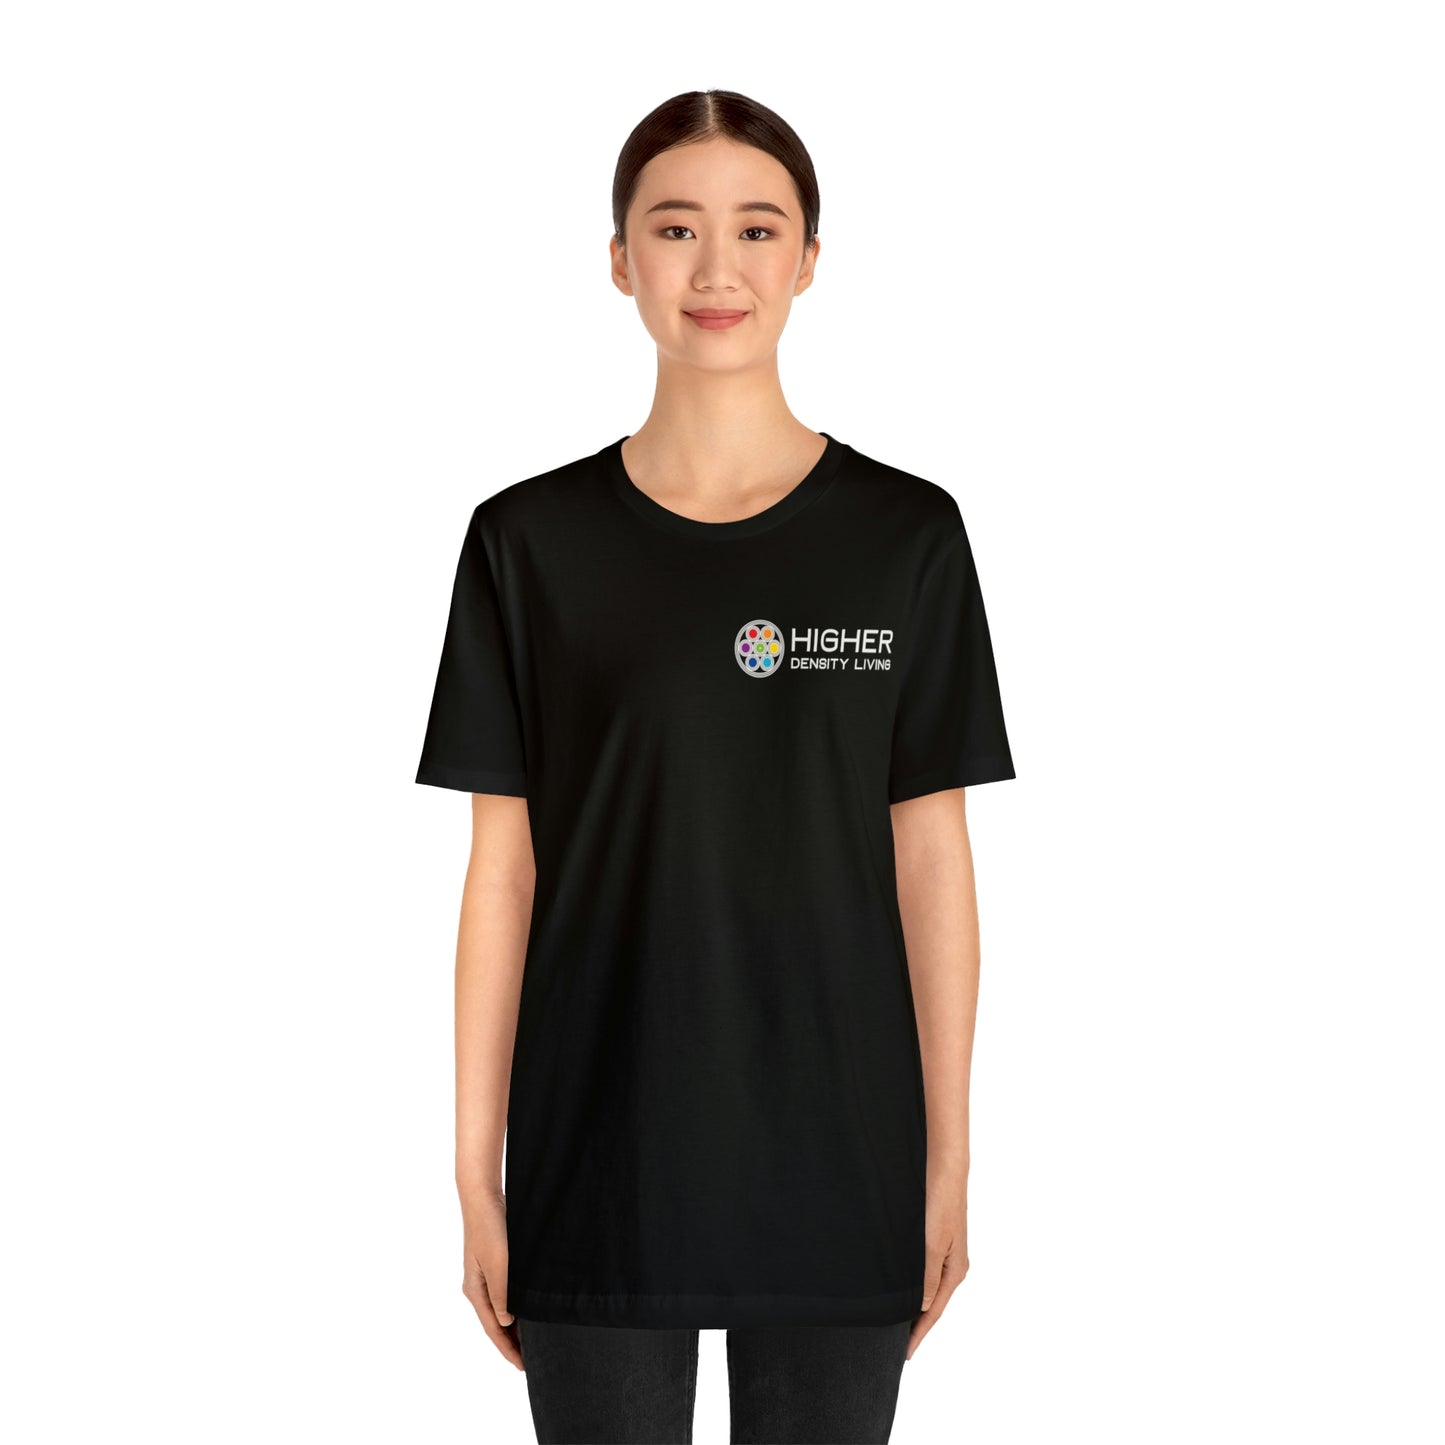 Embody Oneness: Exclusive HDL T-Shirts for Conscious Souls